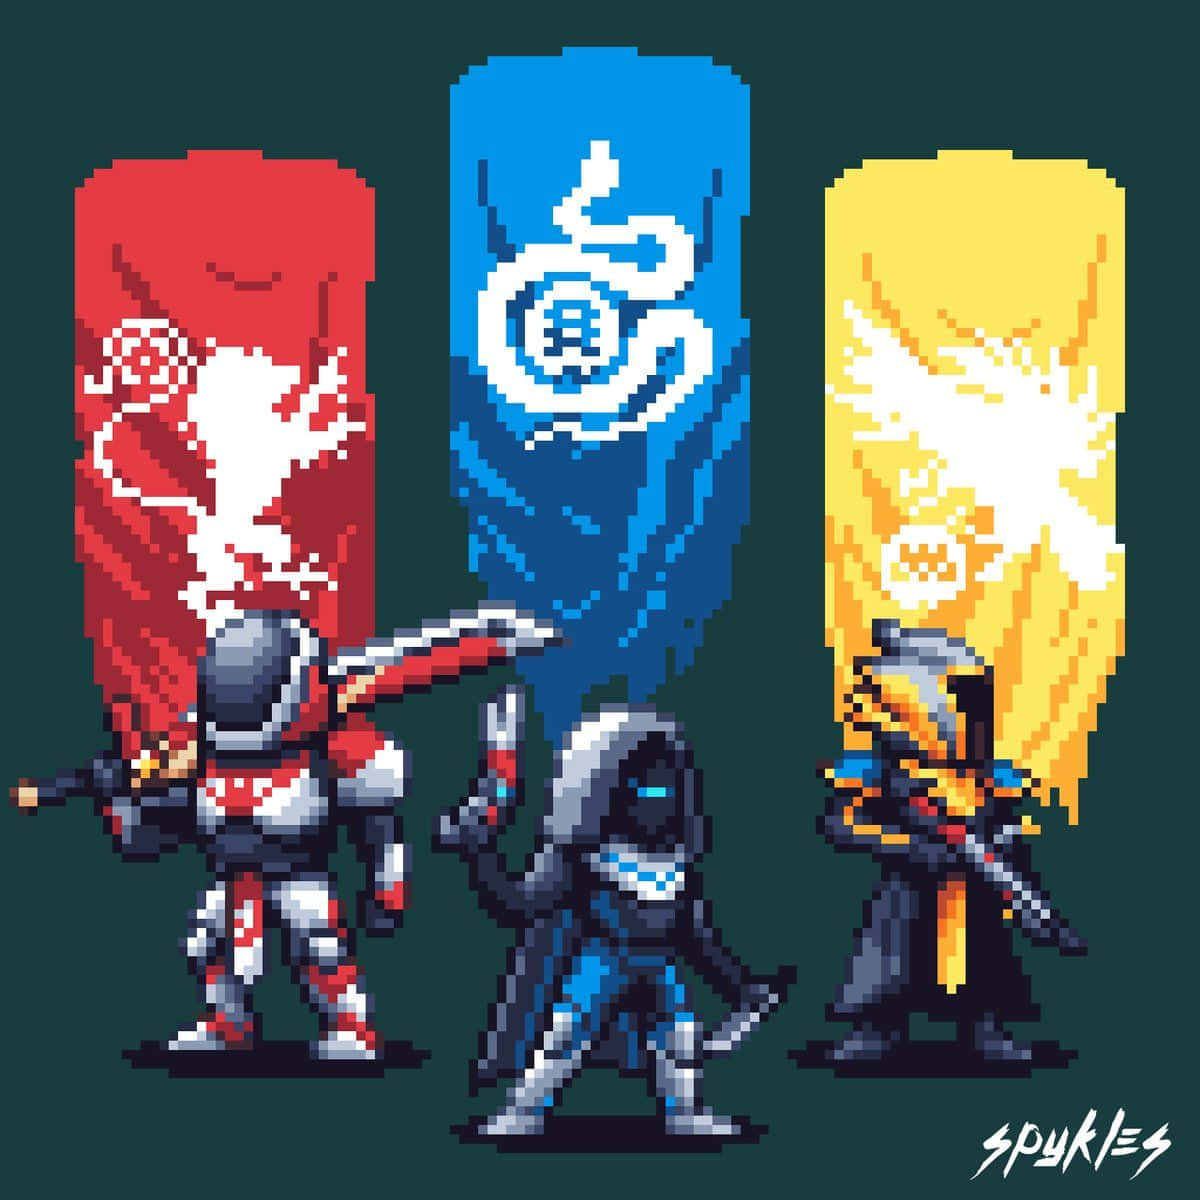 Beautifully Crafted Pixel Art Of Bungie's Destiny